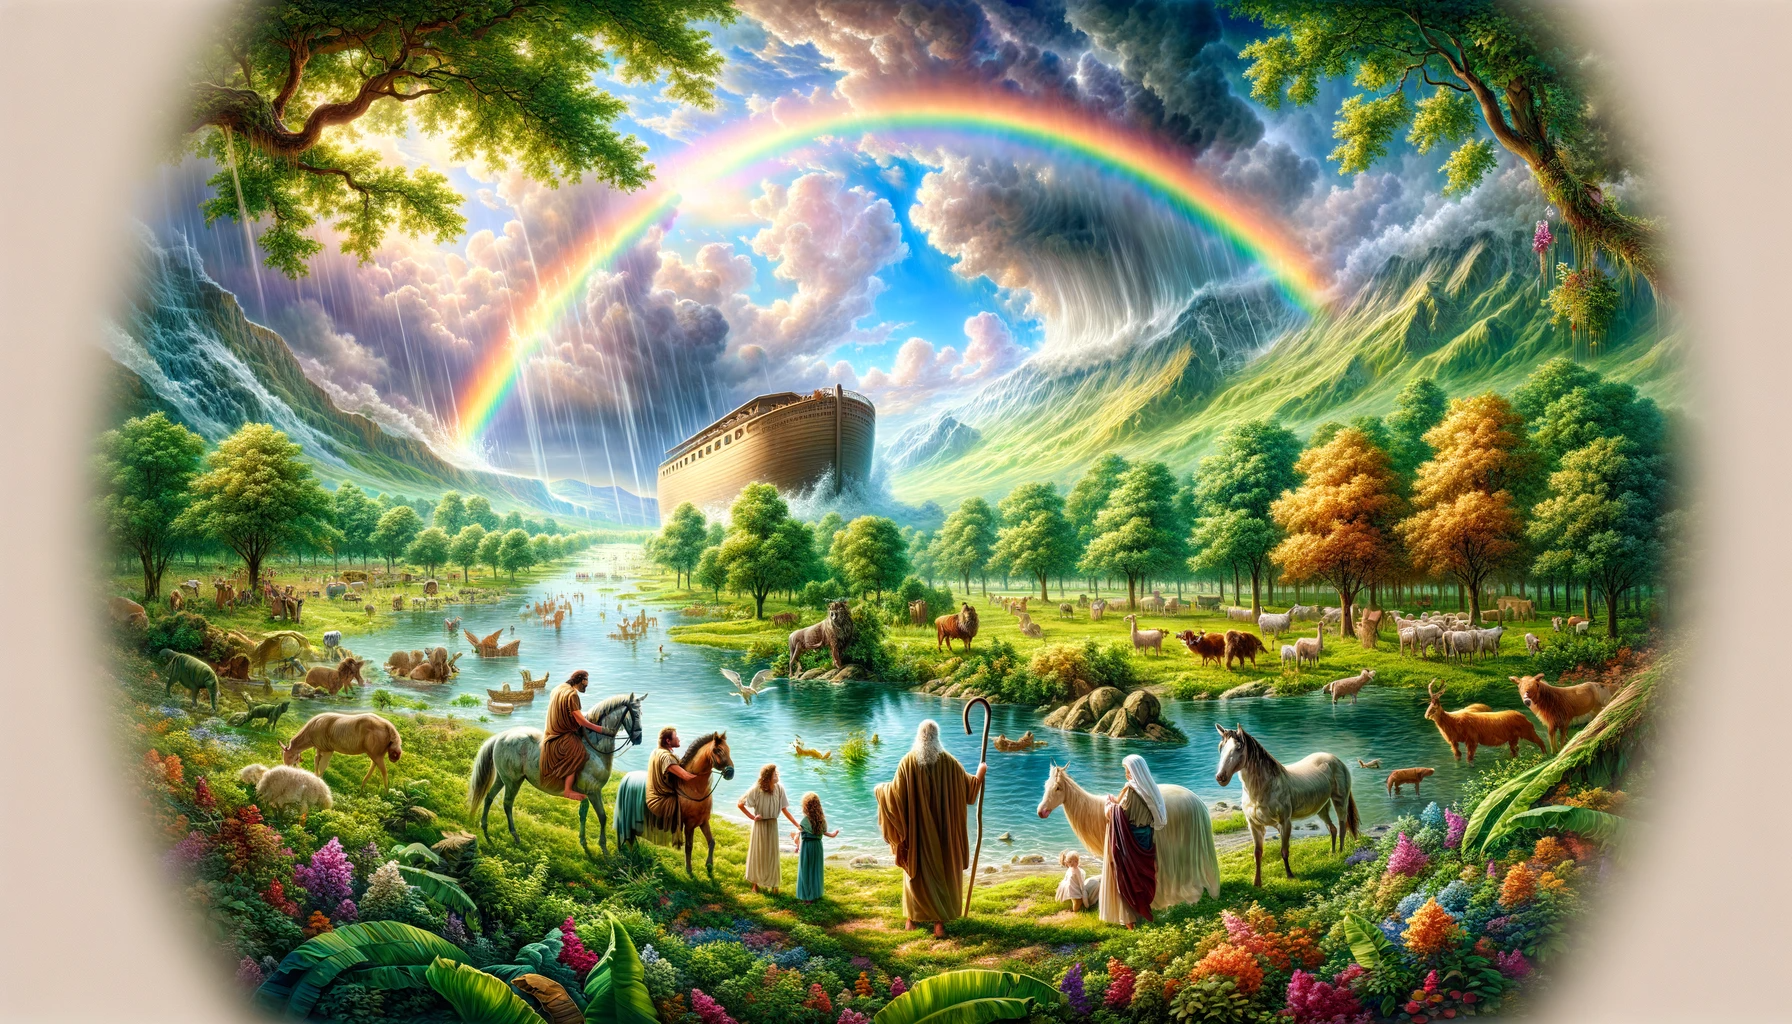 Ark.au Illustrated Bible - Genesis 9:16 - The rainbow will be in the cloud. I will look at it, that I may remember the everlasting covenant between God and every living creature of all flesh that is on the earth.